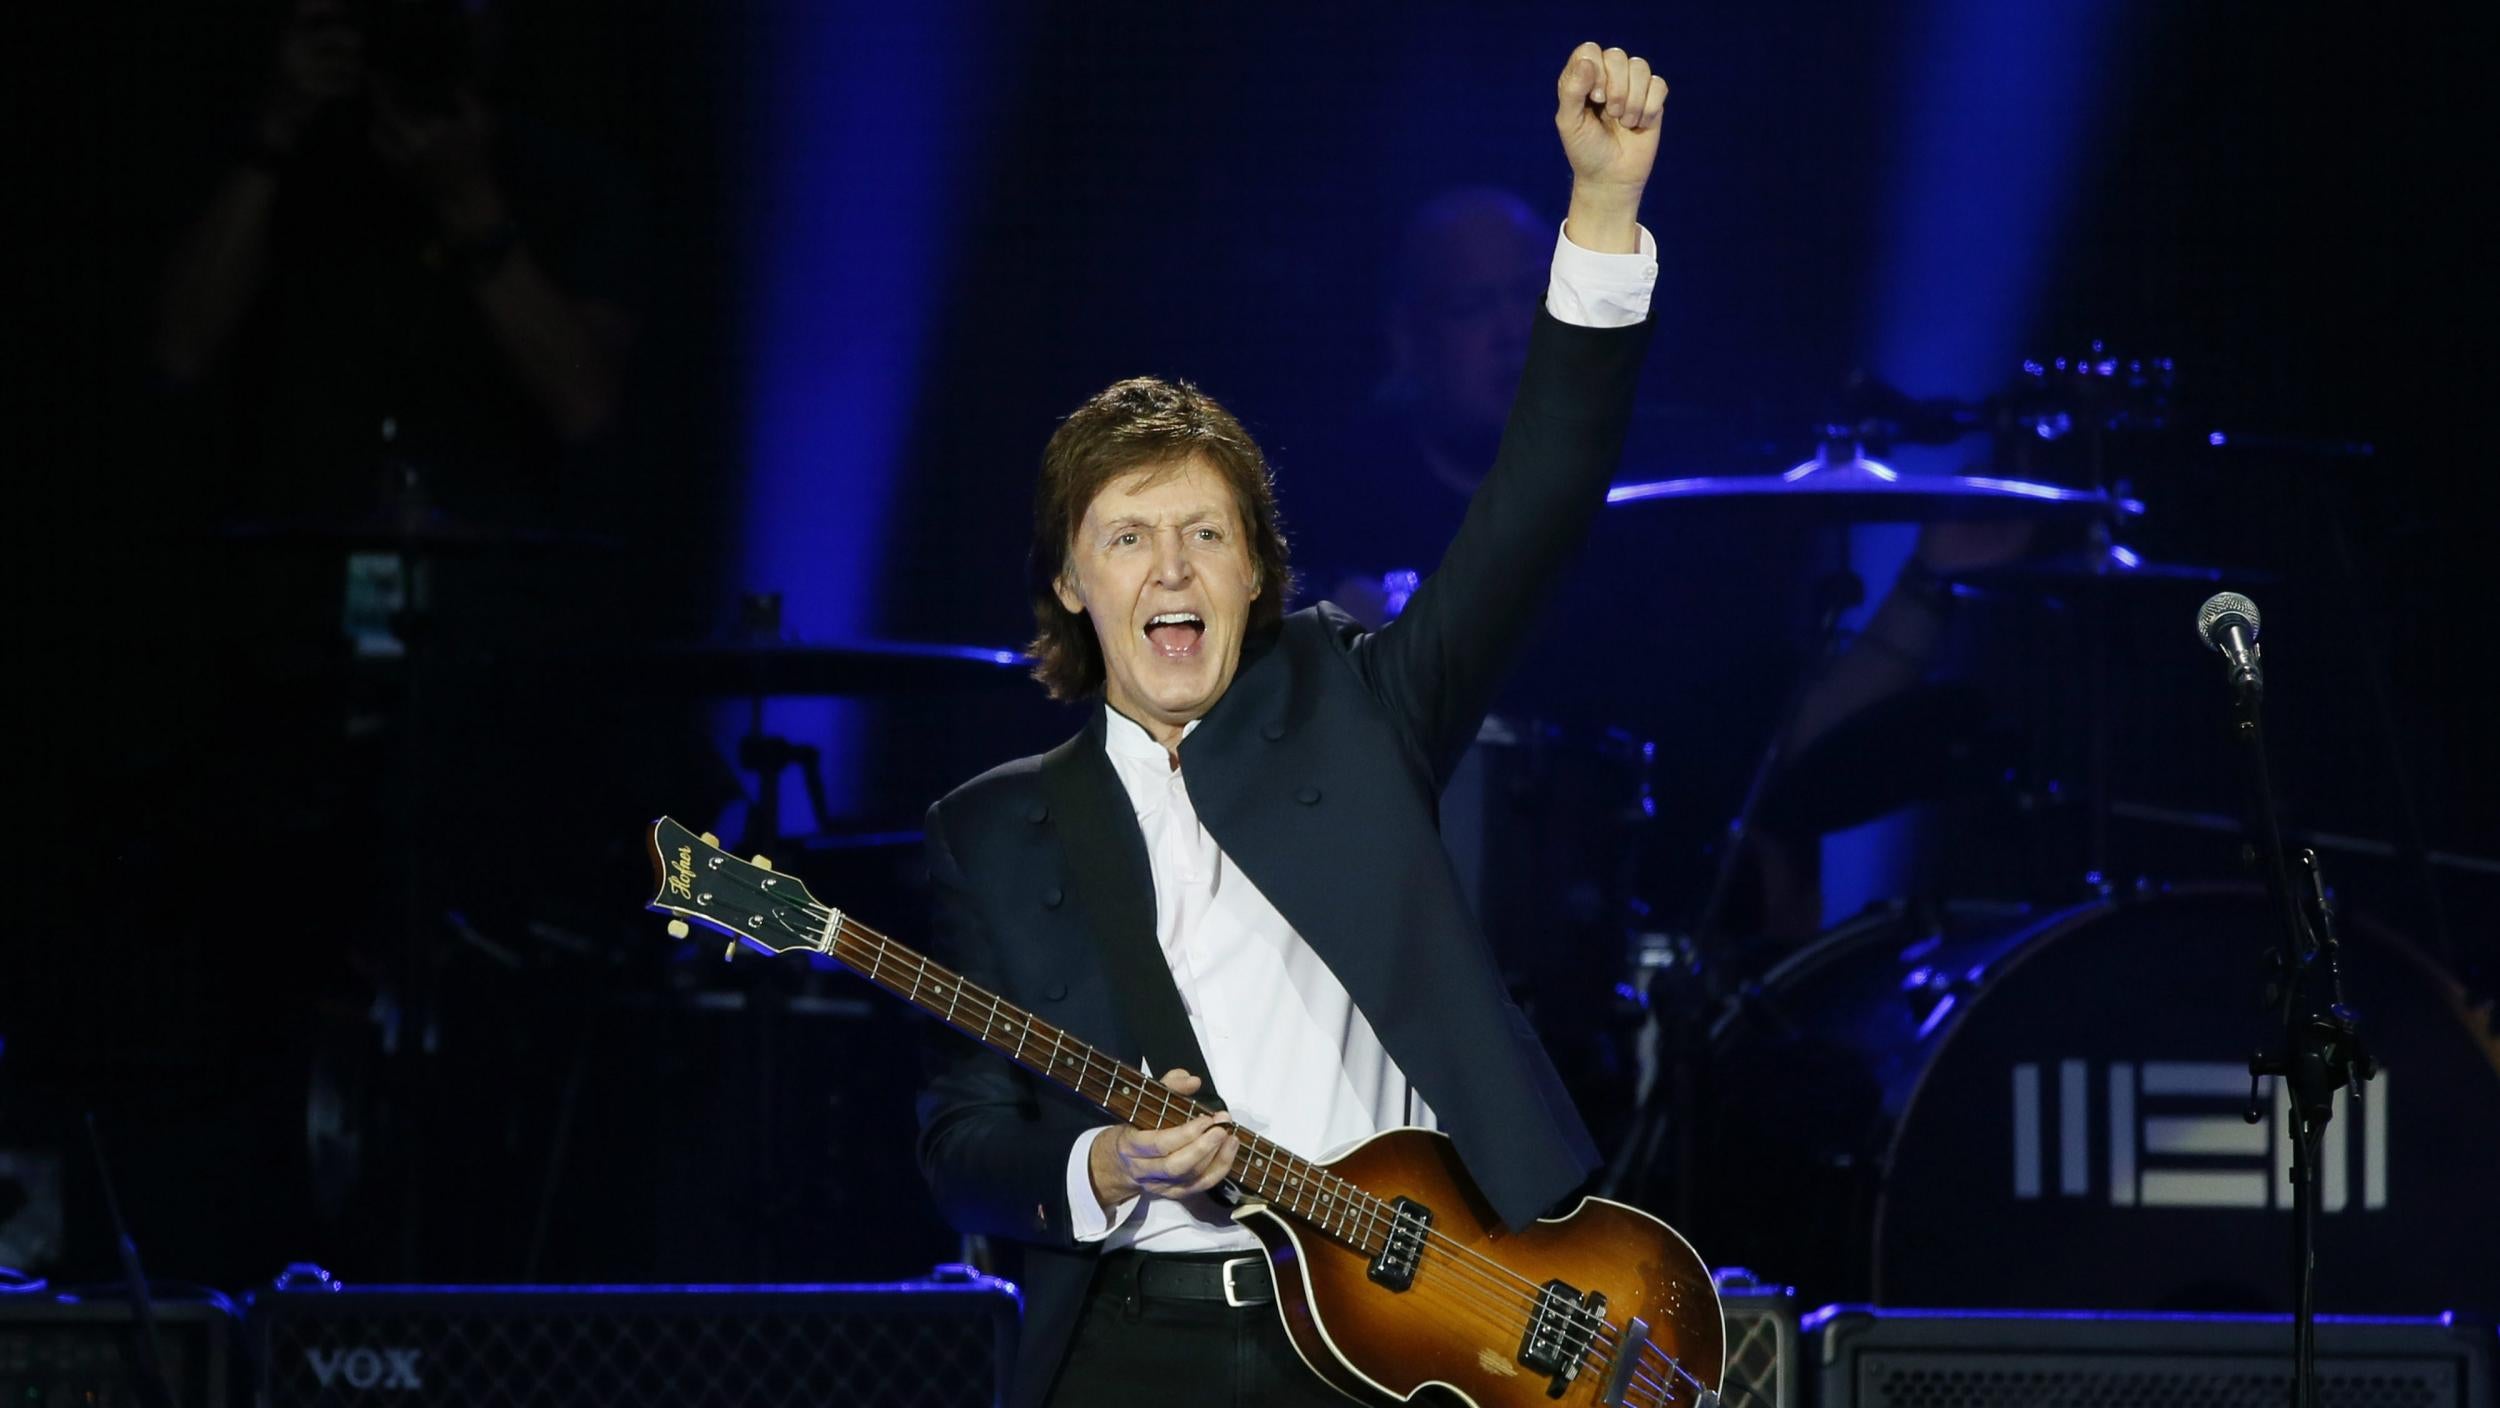 Paul McCartney joins the cast of Pirates of the Caribbean 5 | The ...